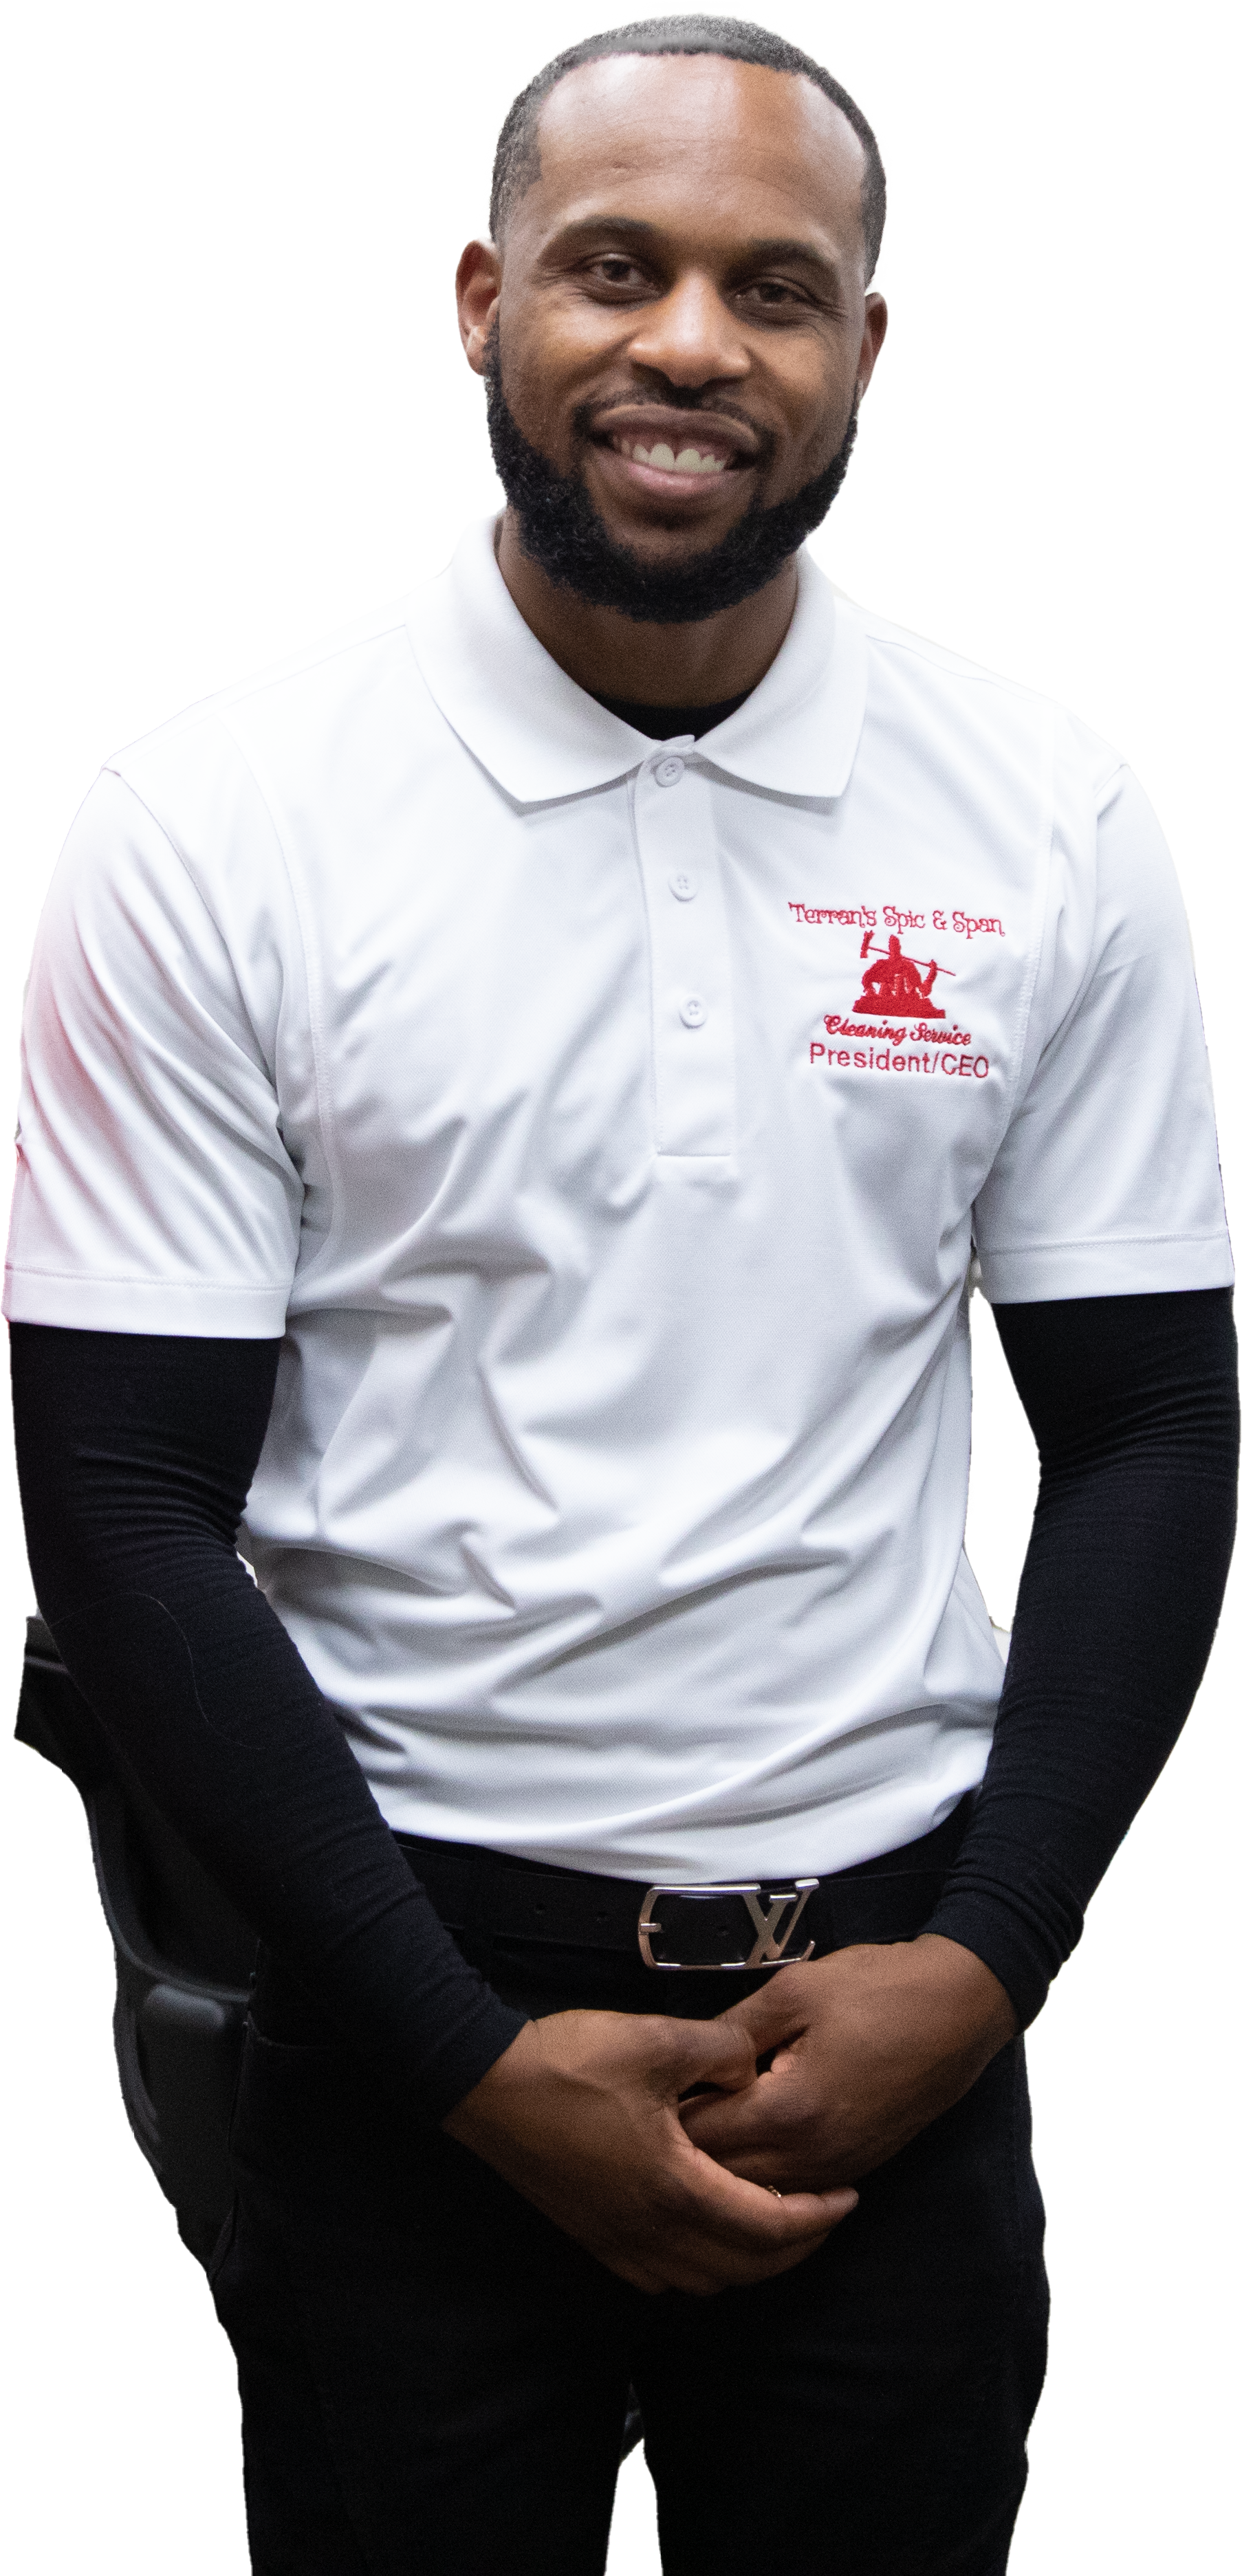 Terran Copeland, founder and CEO of Terran's Spic & Span LLC wearing white polo shit and black pants